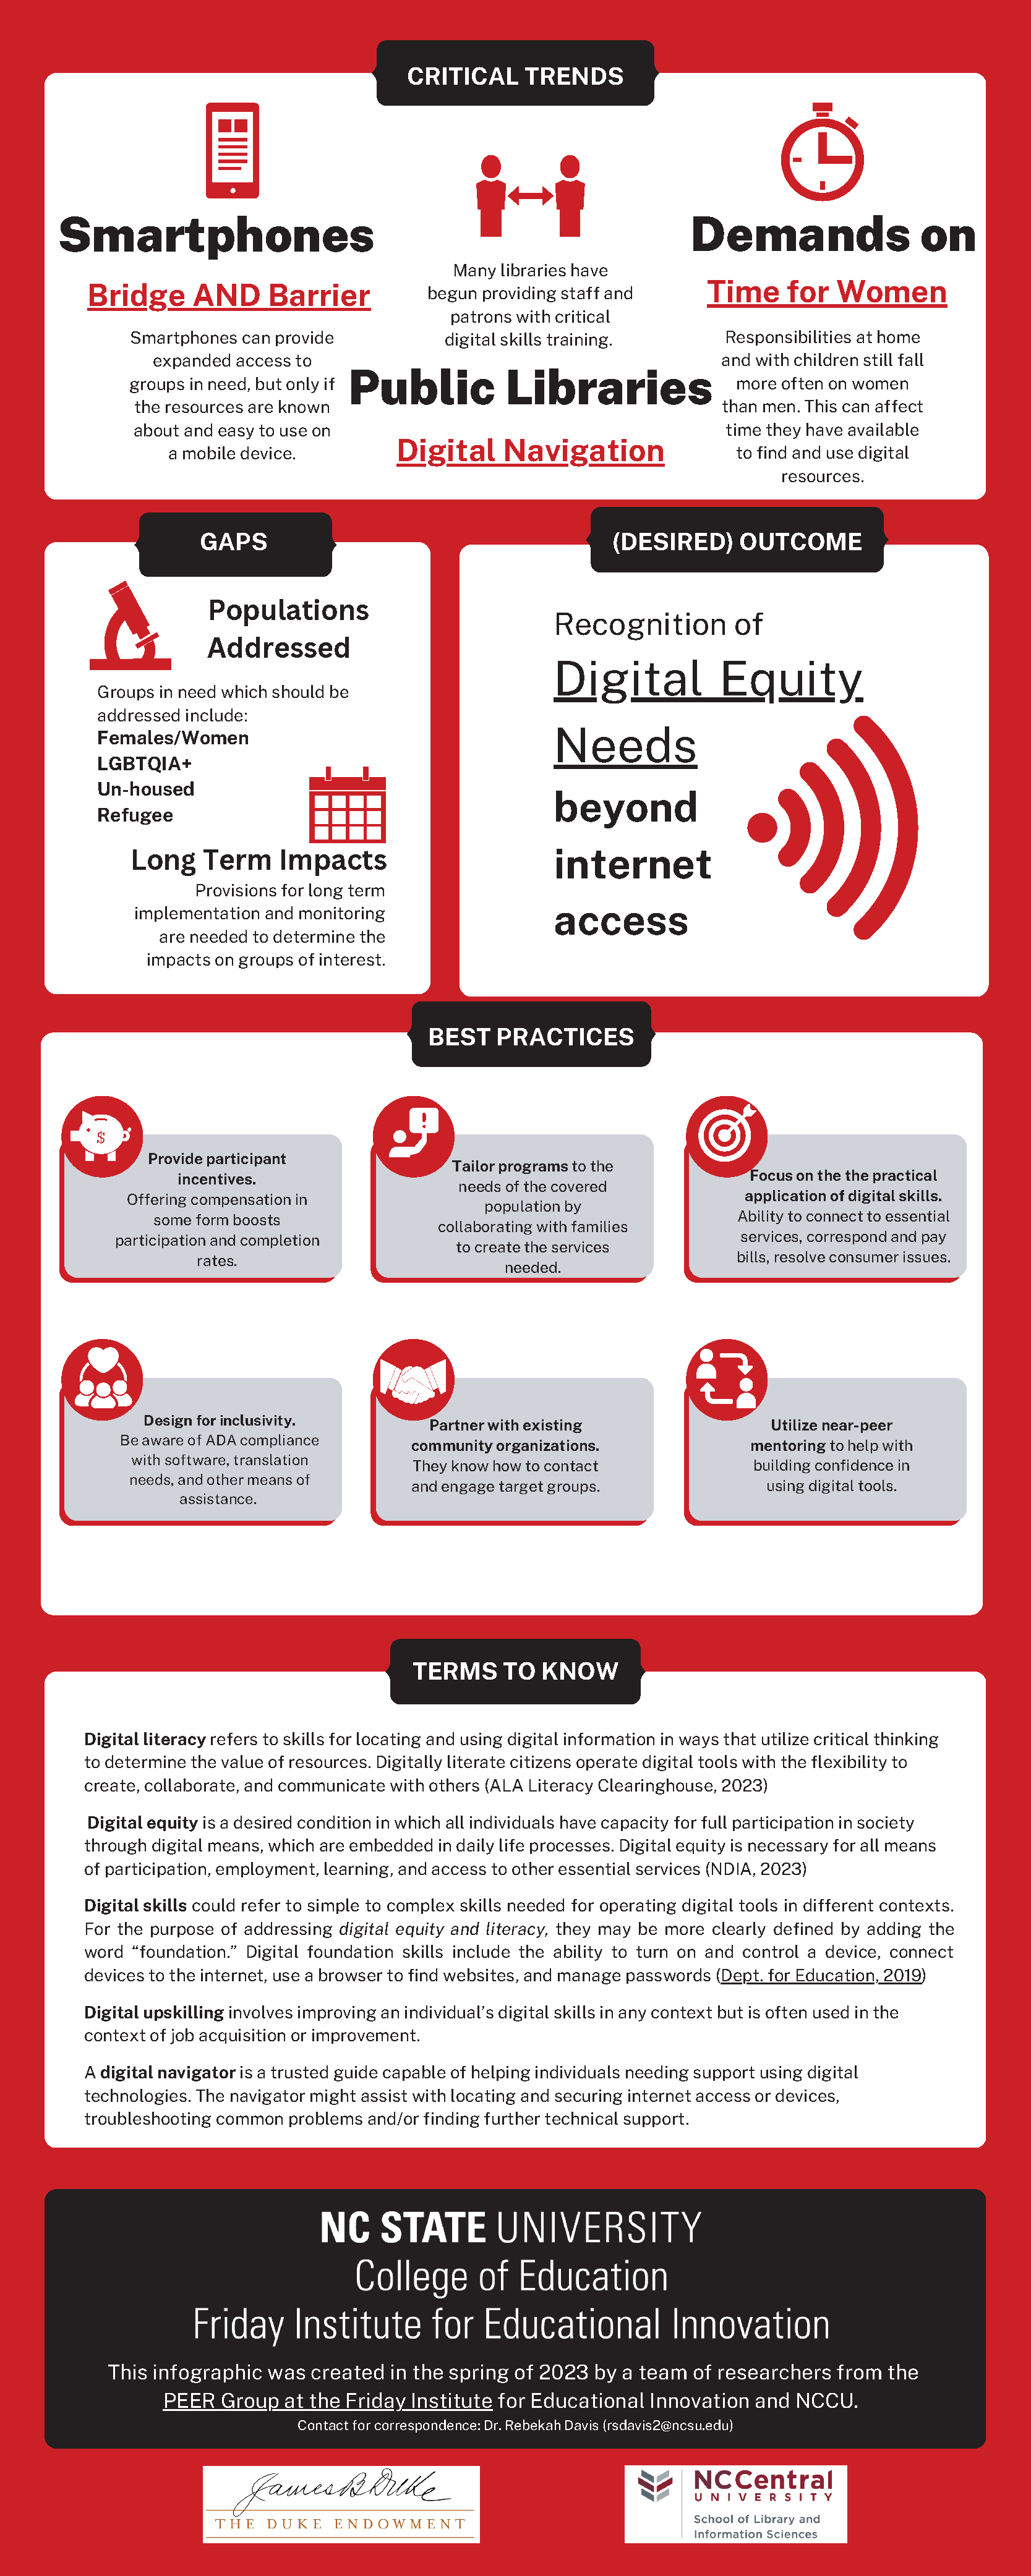 Digital Literacy and Equity: Mapping the evidence. An infographic displaying critical trends, gaps, desired outcome, best practices and terms to know.